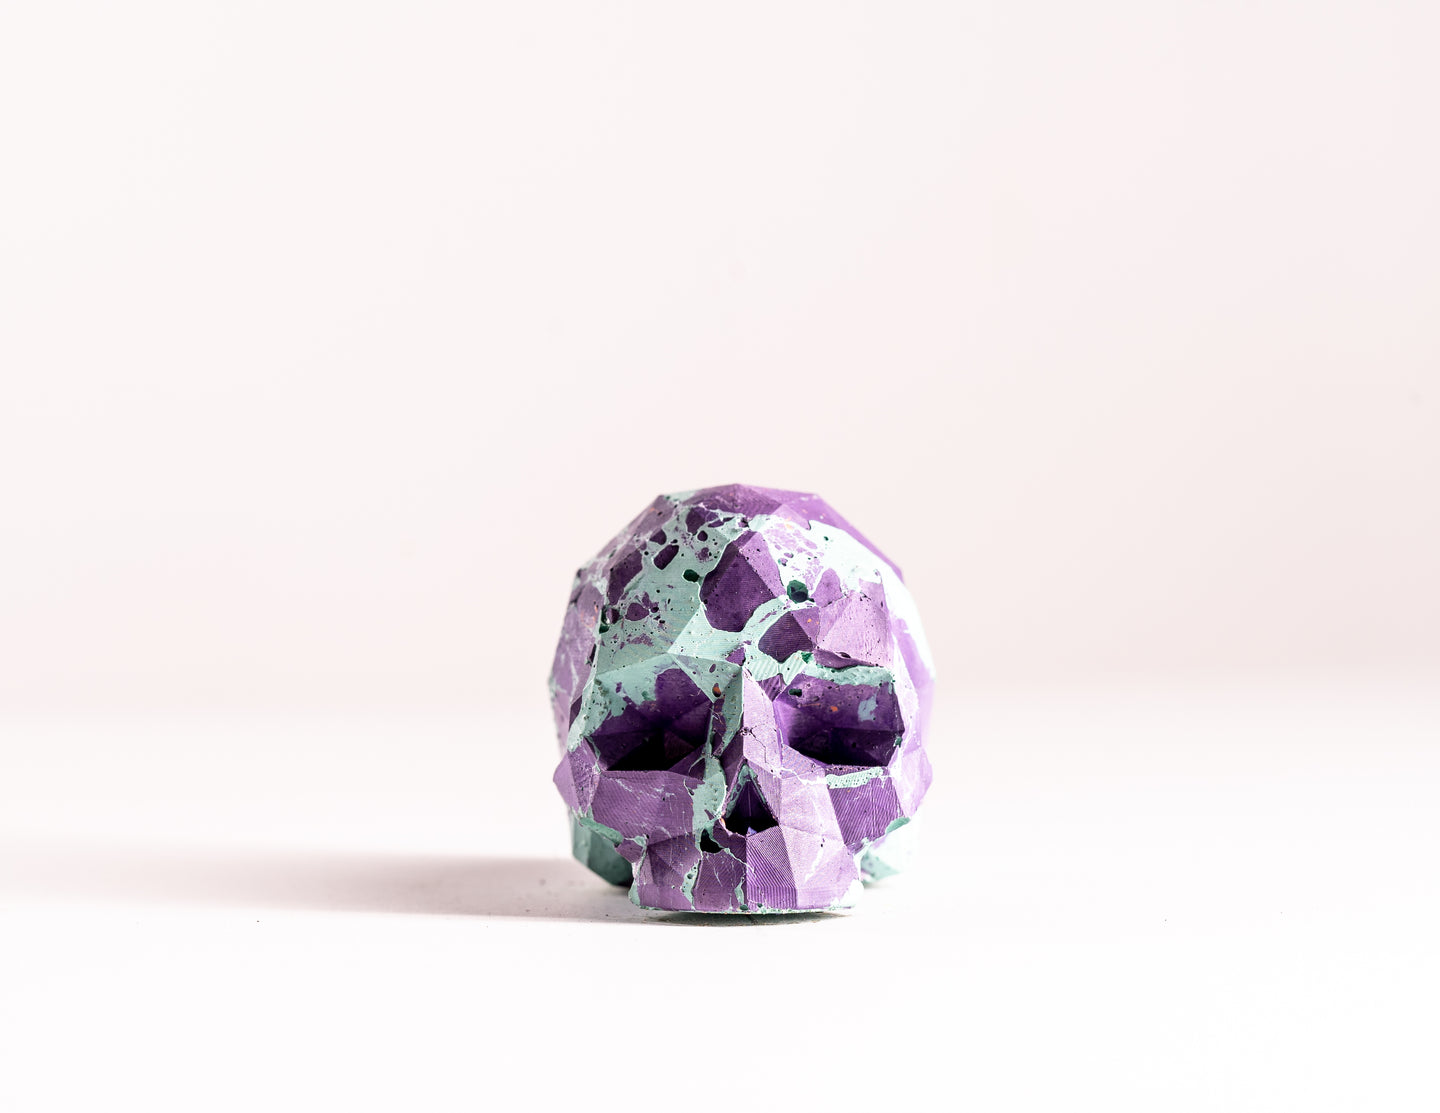 Mini Collectible Skull - Marbled - 135